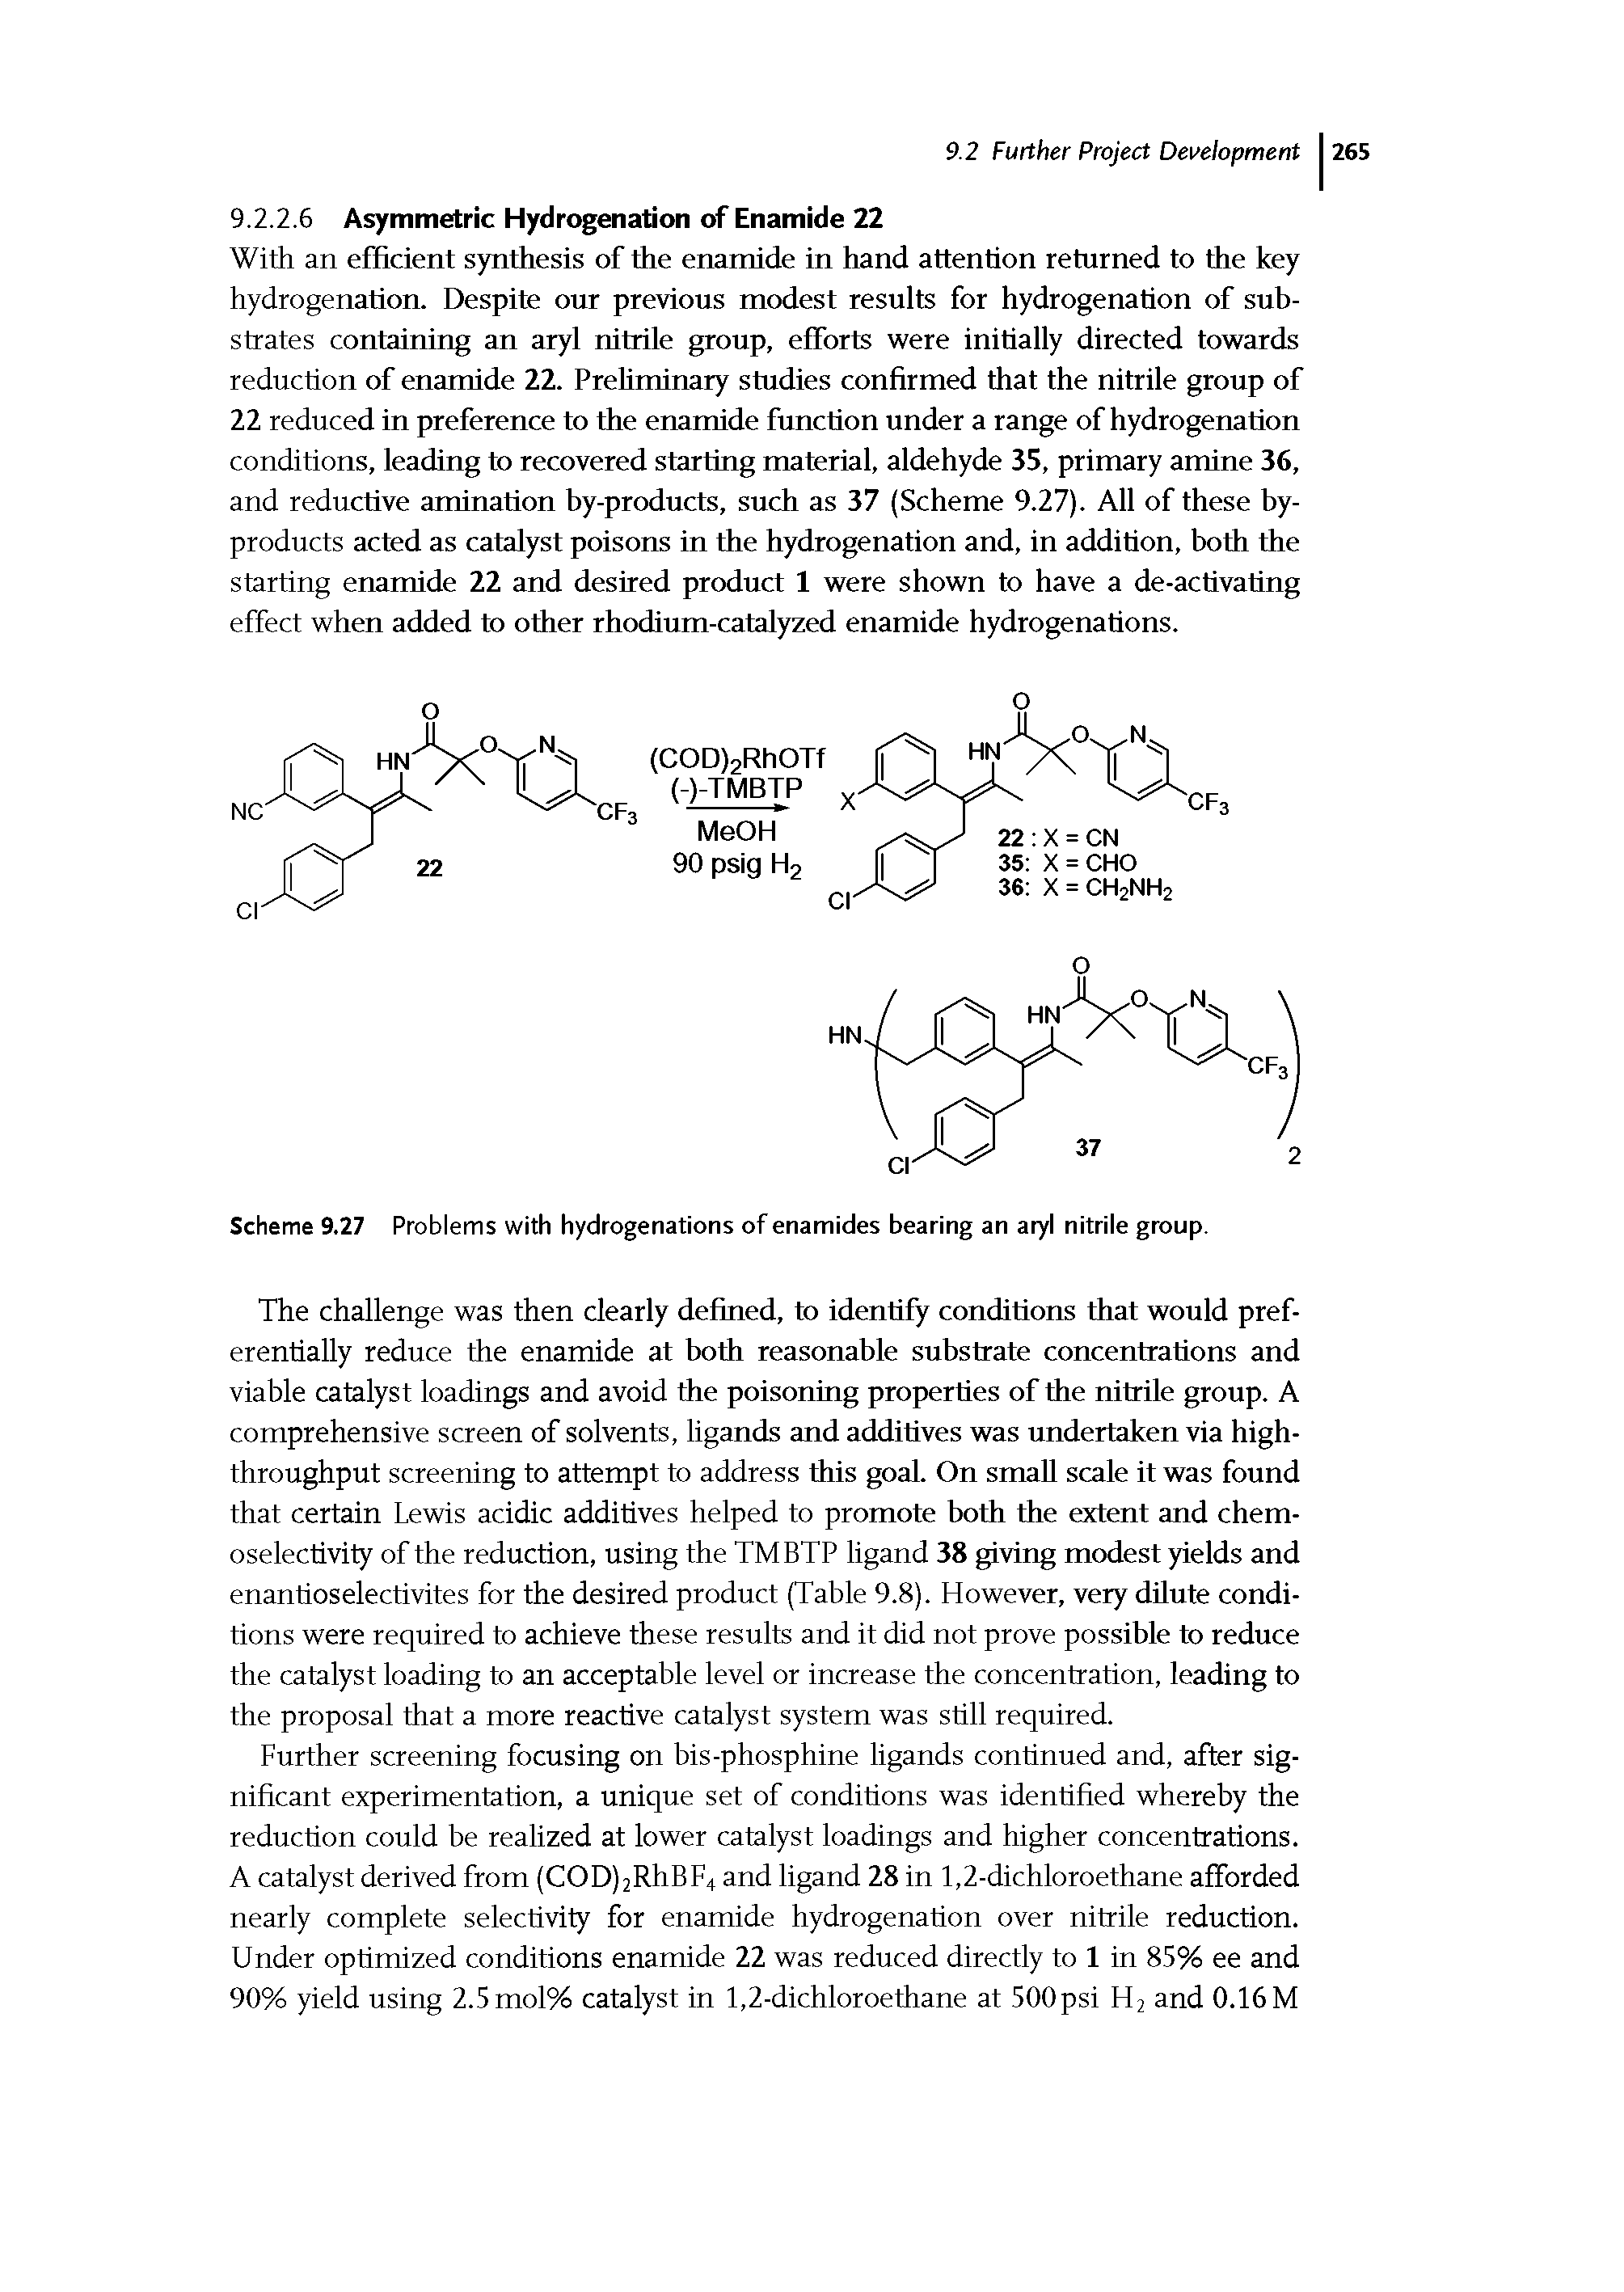 Scheme 9.27 Problems with hydrogenations of enamides bearing an aryl nitrile group.